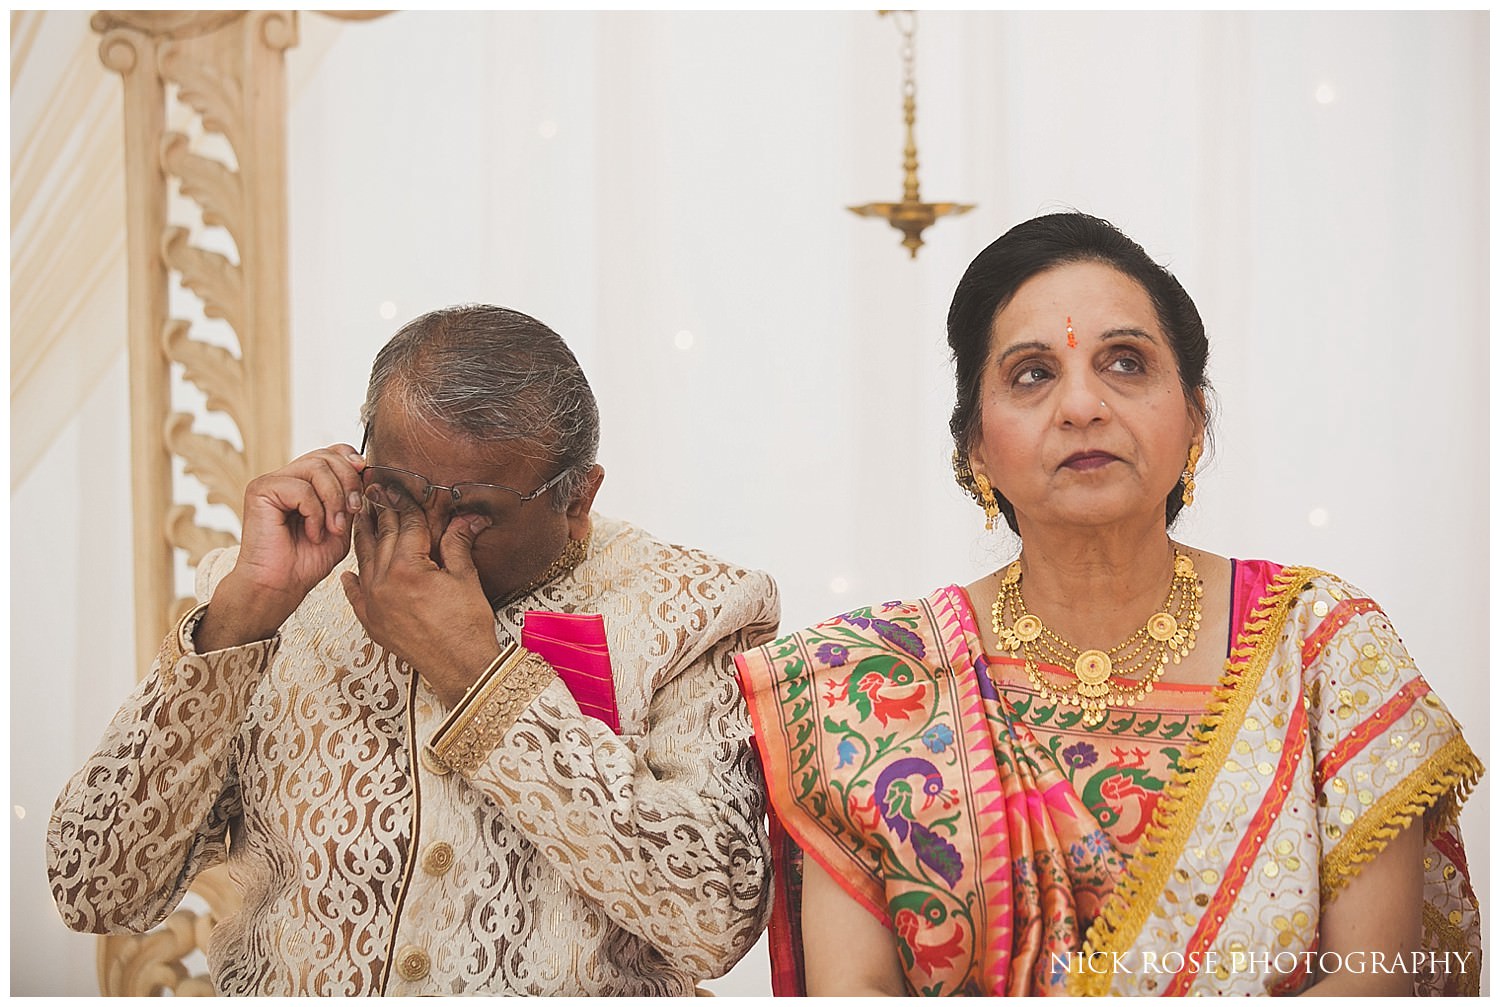  Father of the bride crying during his daughters wedding entrance at East Wintergarden Hindu wedding in Canary Wharf London 